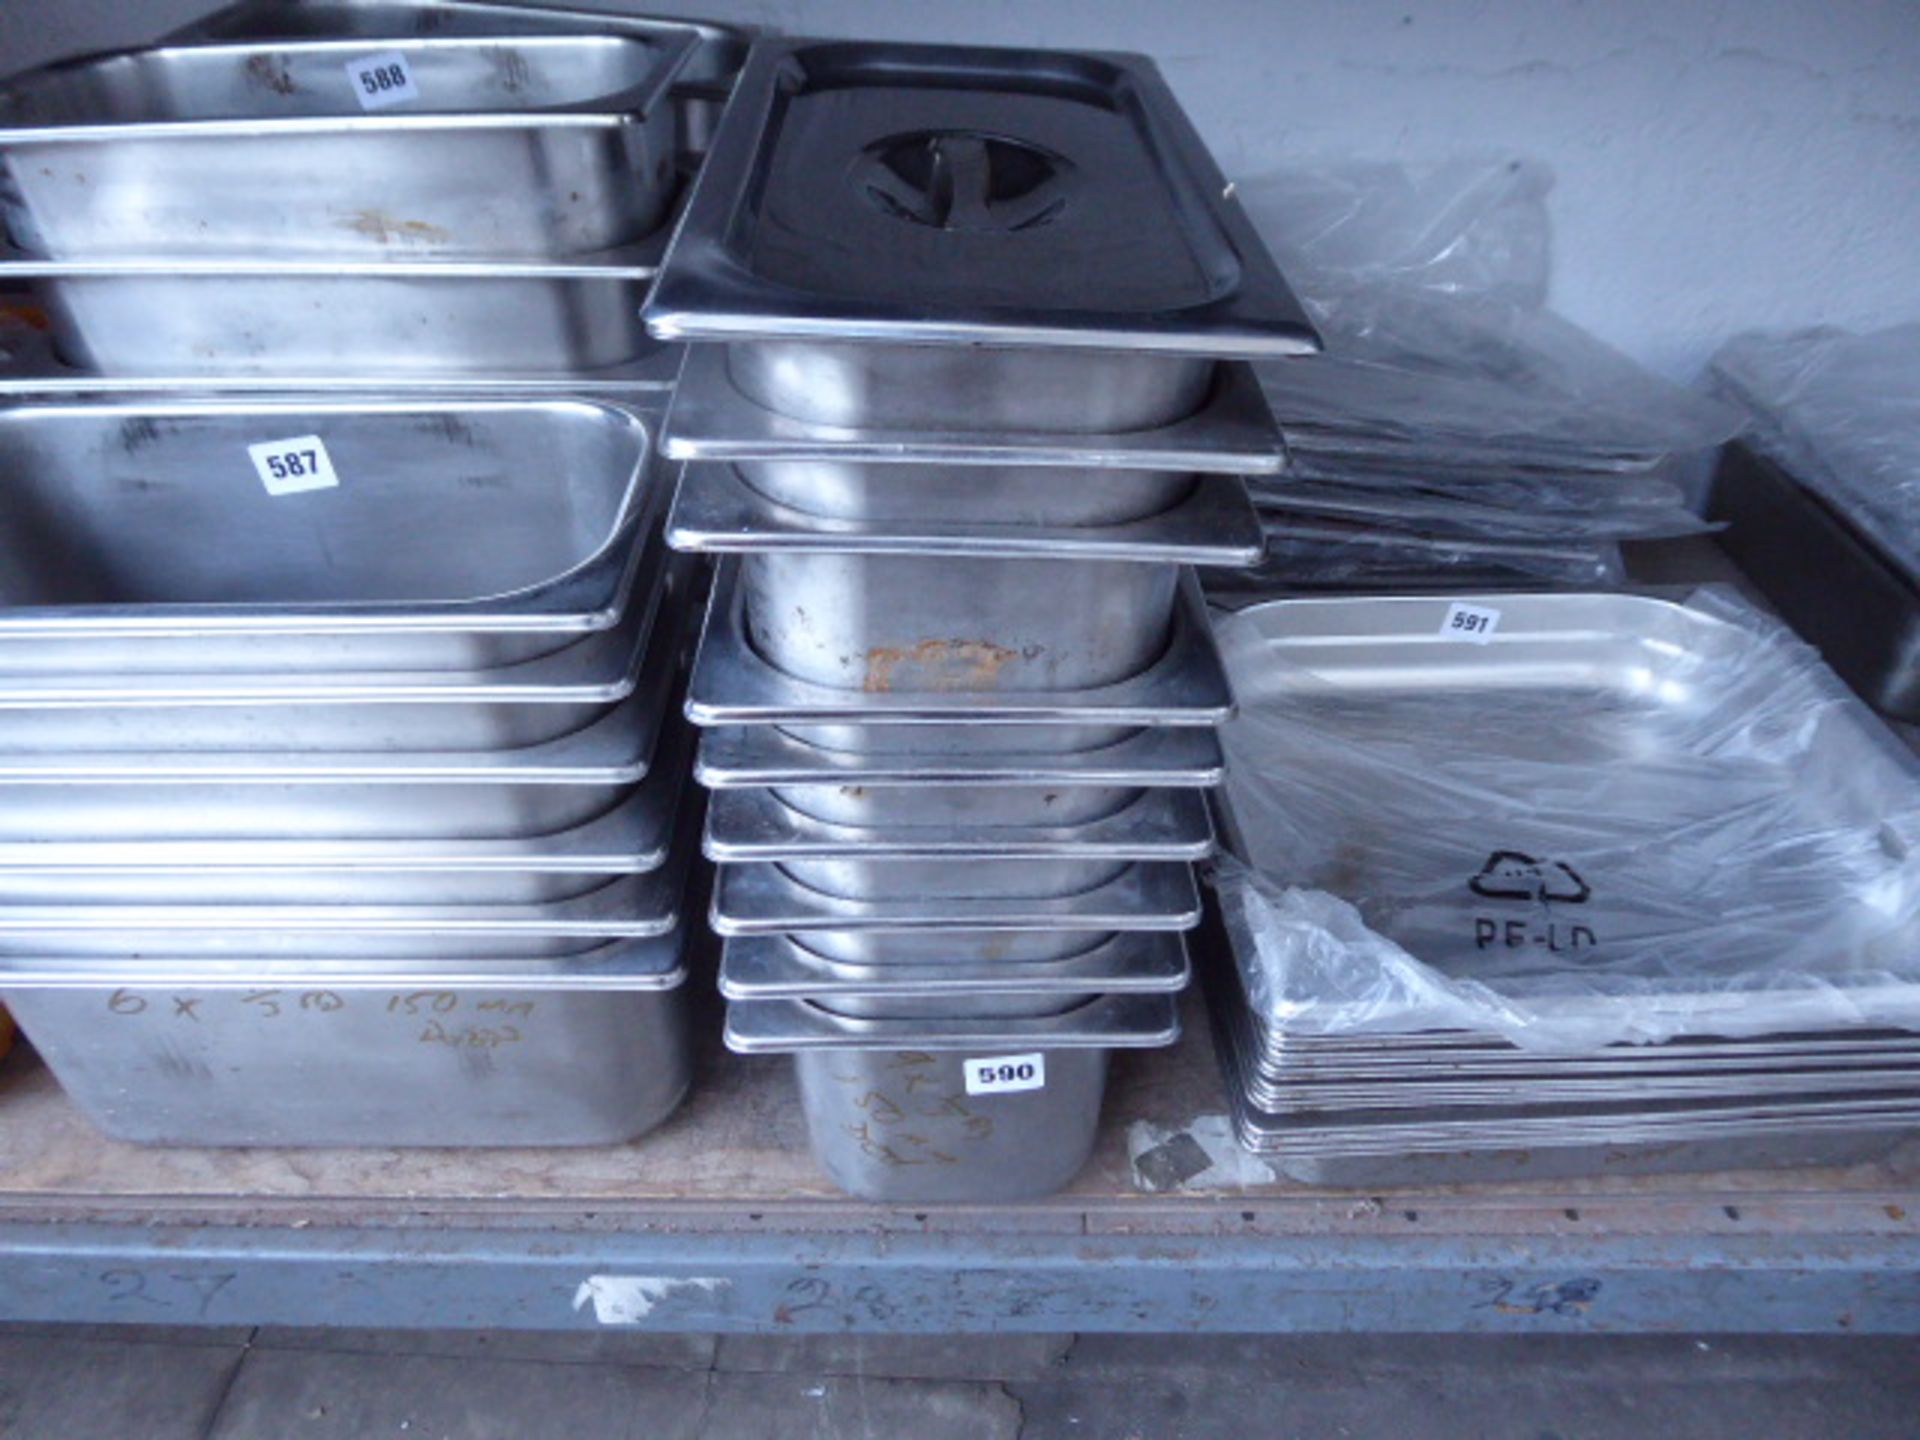 9 stainless steel 1/3 gastronorms 150mm deep